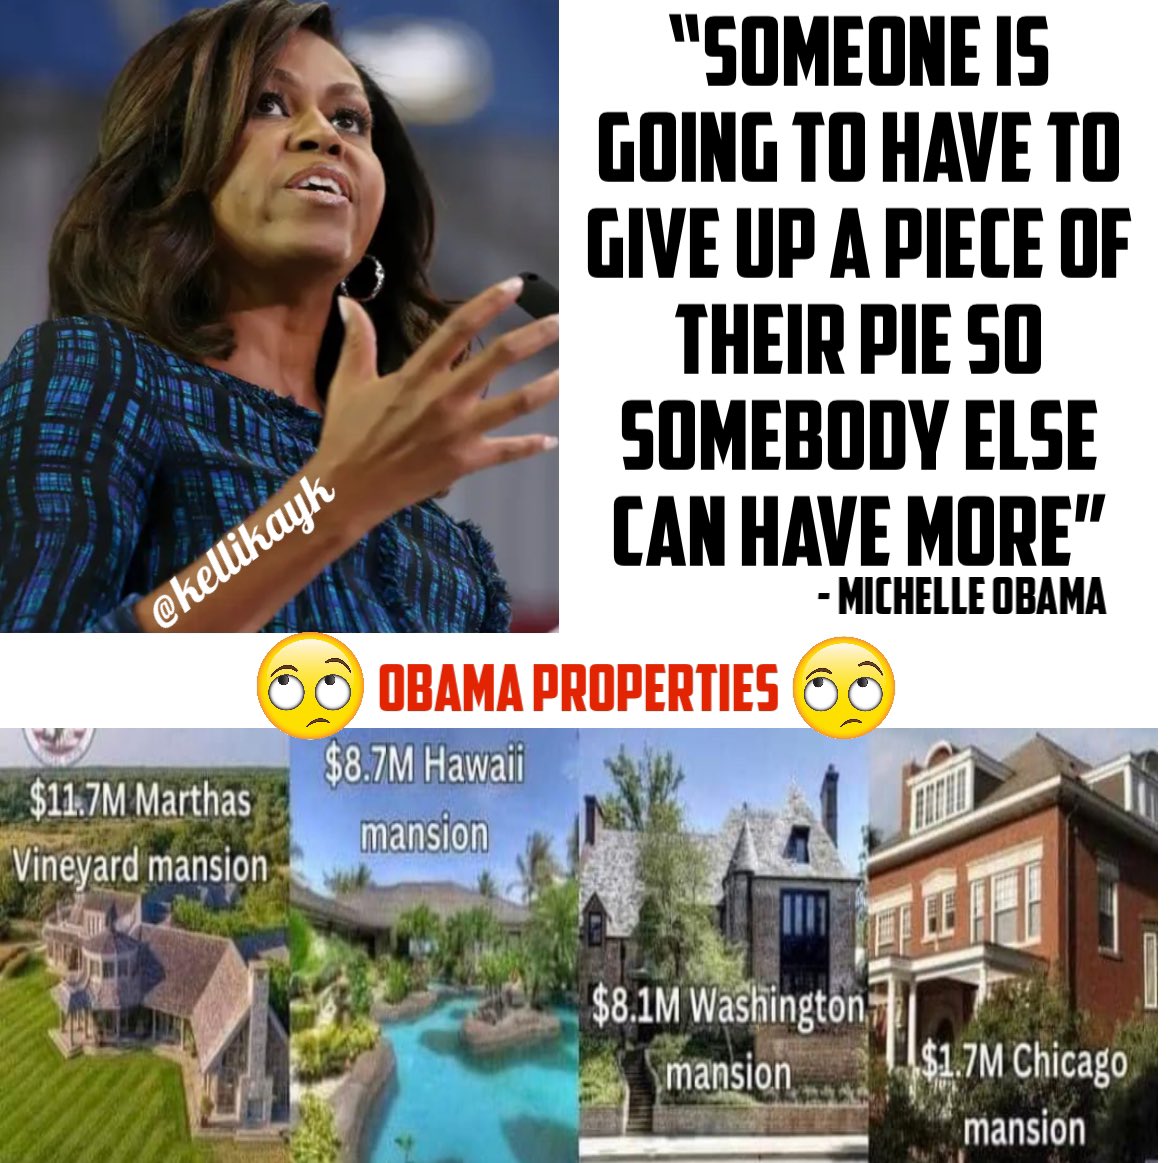 Michelle Obama said “Someone is going to have to give up a piece of their pie so somebody else can have more” 🙄

How about you give away your $30 million in properties you DIDN’T work for and go the fuck back to Kenya 😃

Byeeee bish